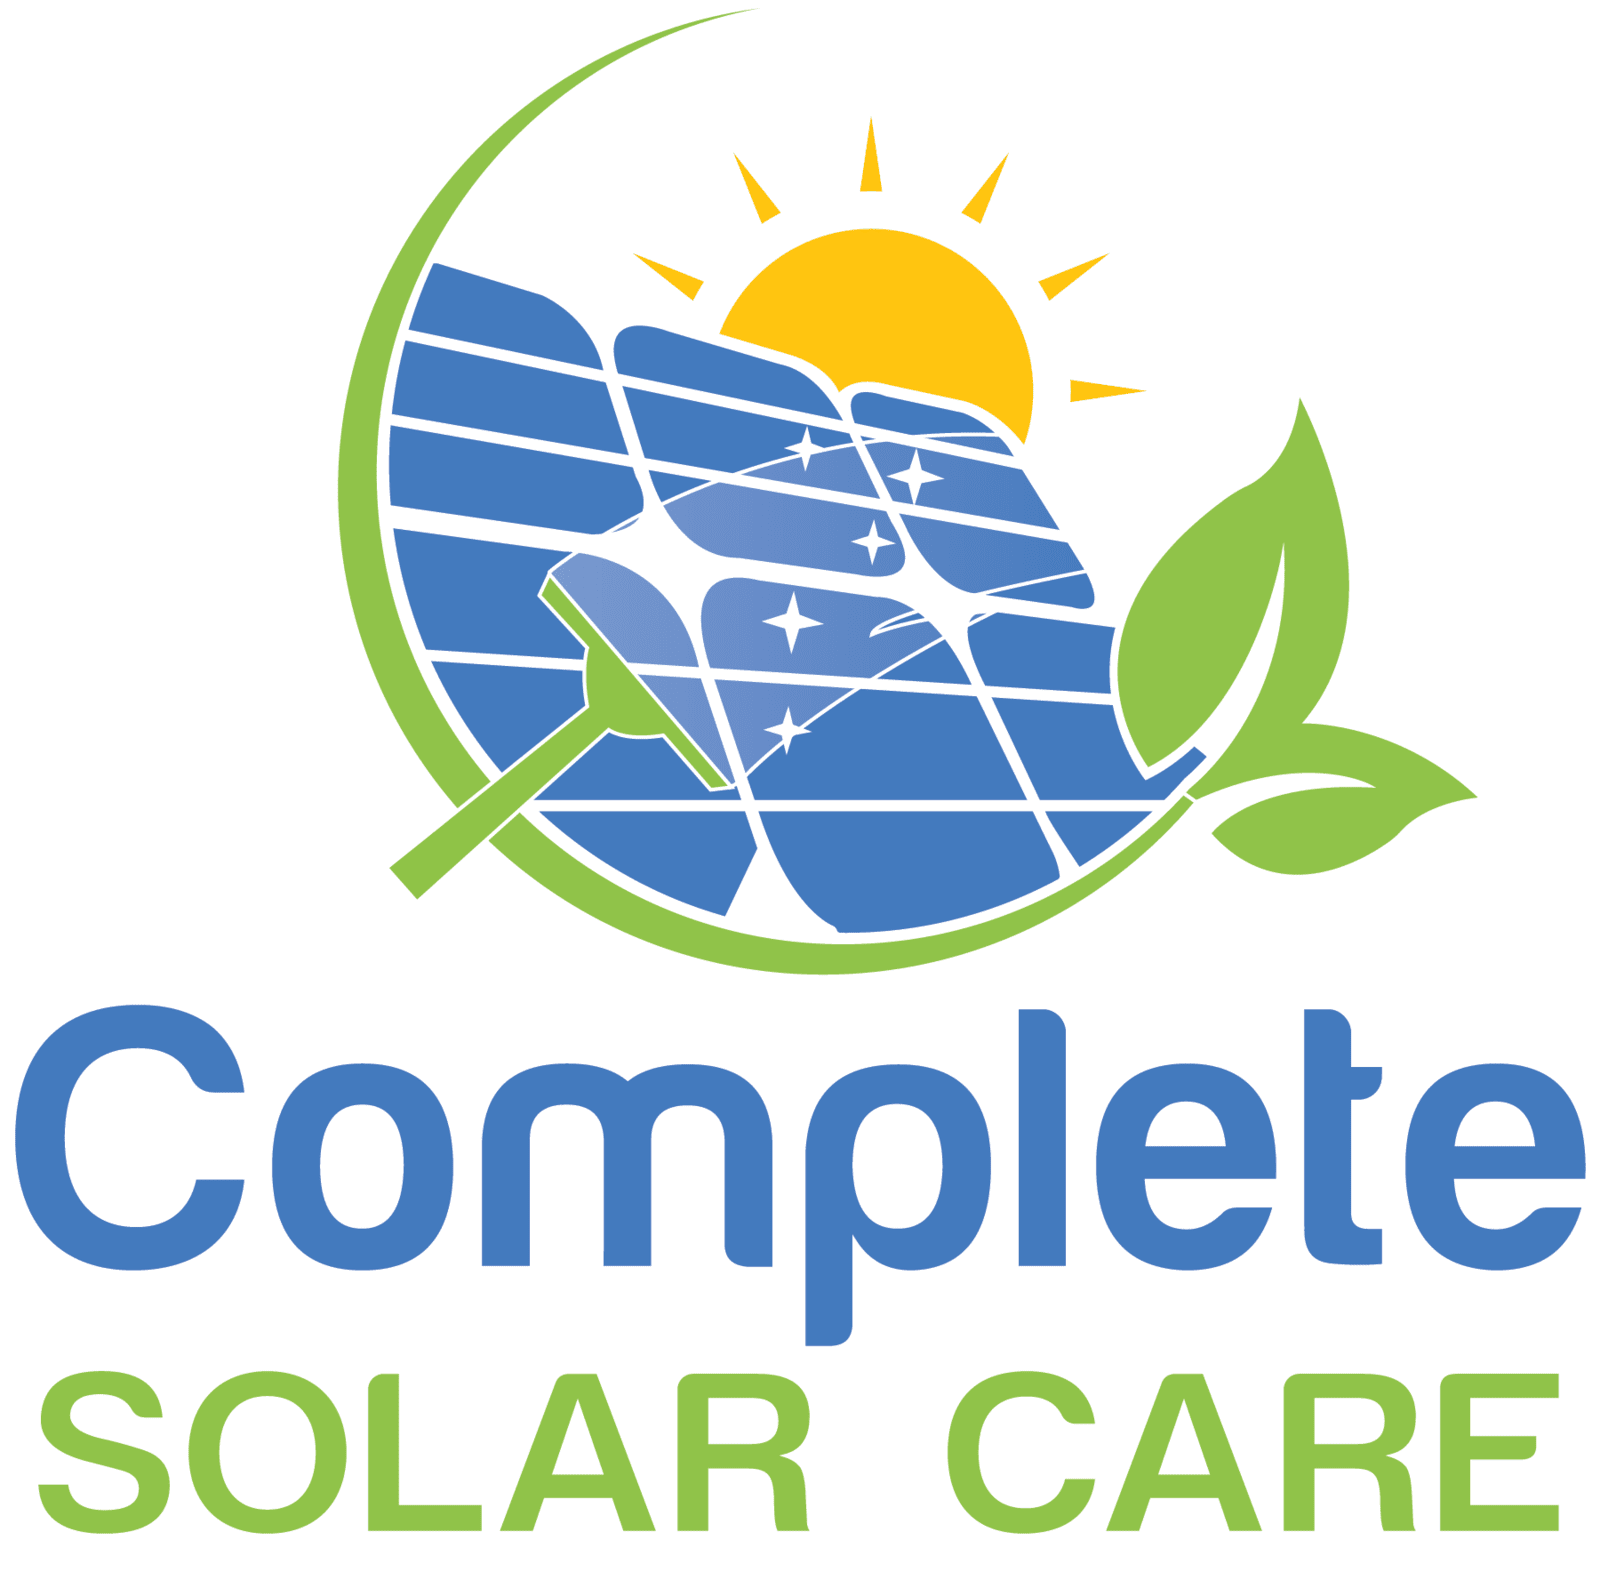 Complete Solar Care - Your one stop solar shop